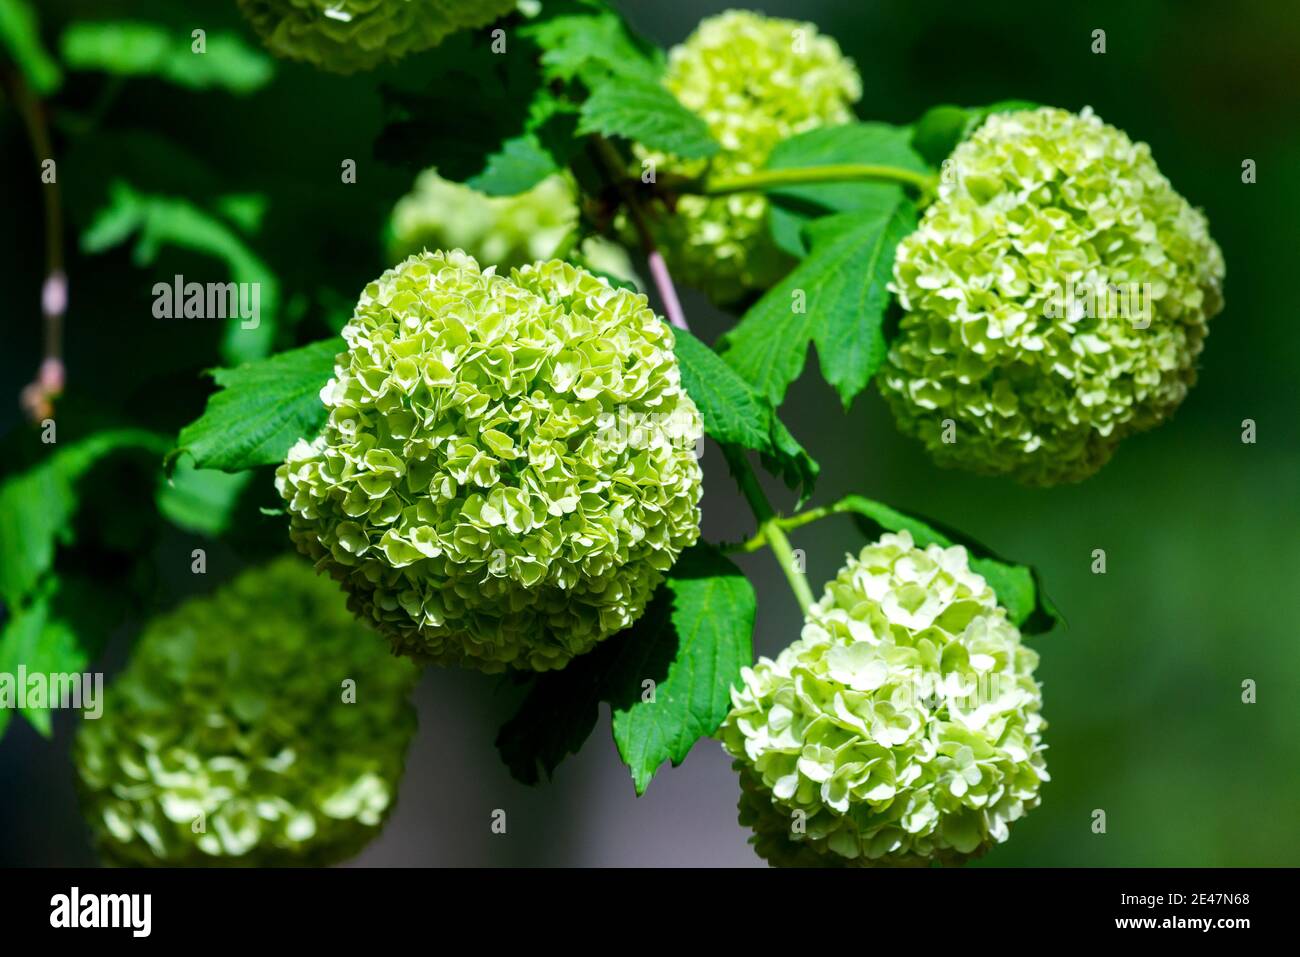 Closeup Of Green Hydrangea Or Hydrangea Macrophylla Are Blooming In Spring And Summer At A Town Garden The Japanese Call This Ajisai Flower Stock Photo Alamy